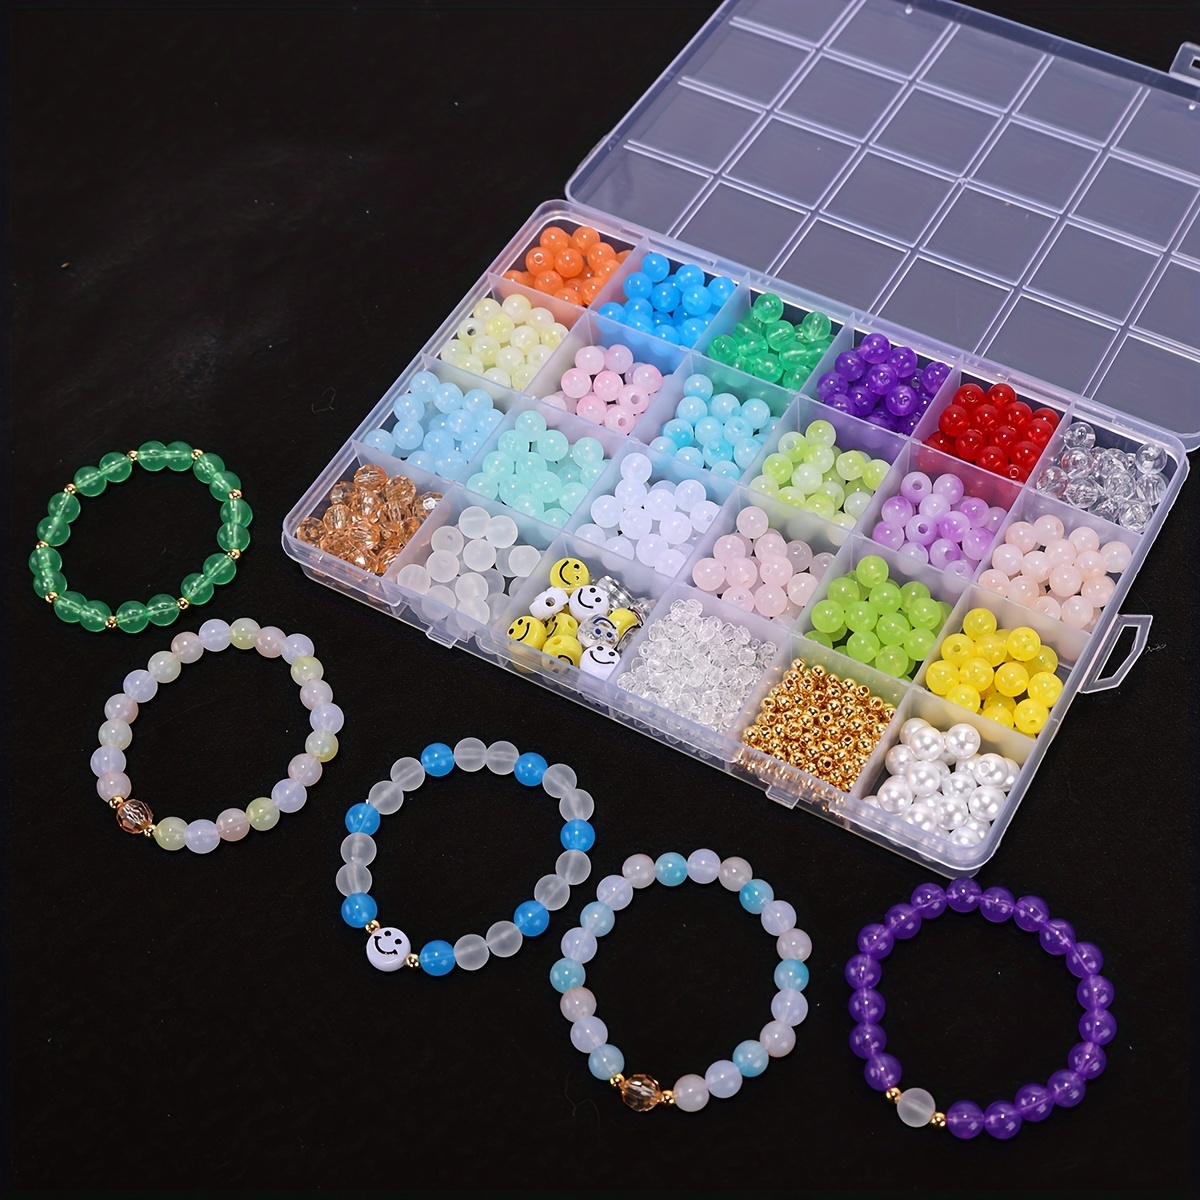 UPINS 960Pcs 8mm Crystal Beads Round Glass Beads for Bracelets Jewelry  Making Crafts 24 Color 2 Box Friendship Acrylic Beads Bulk Necklace  Earrings